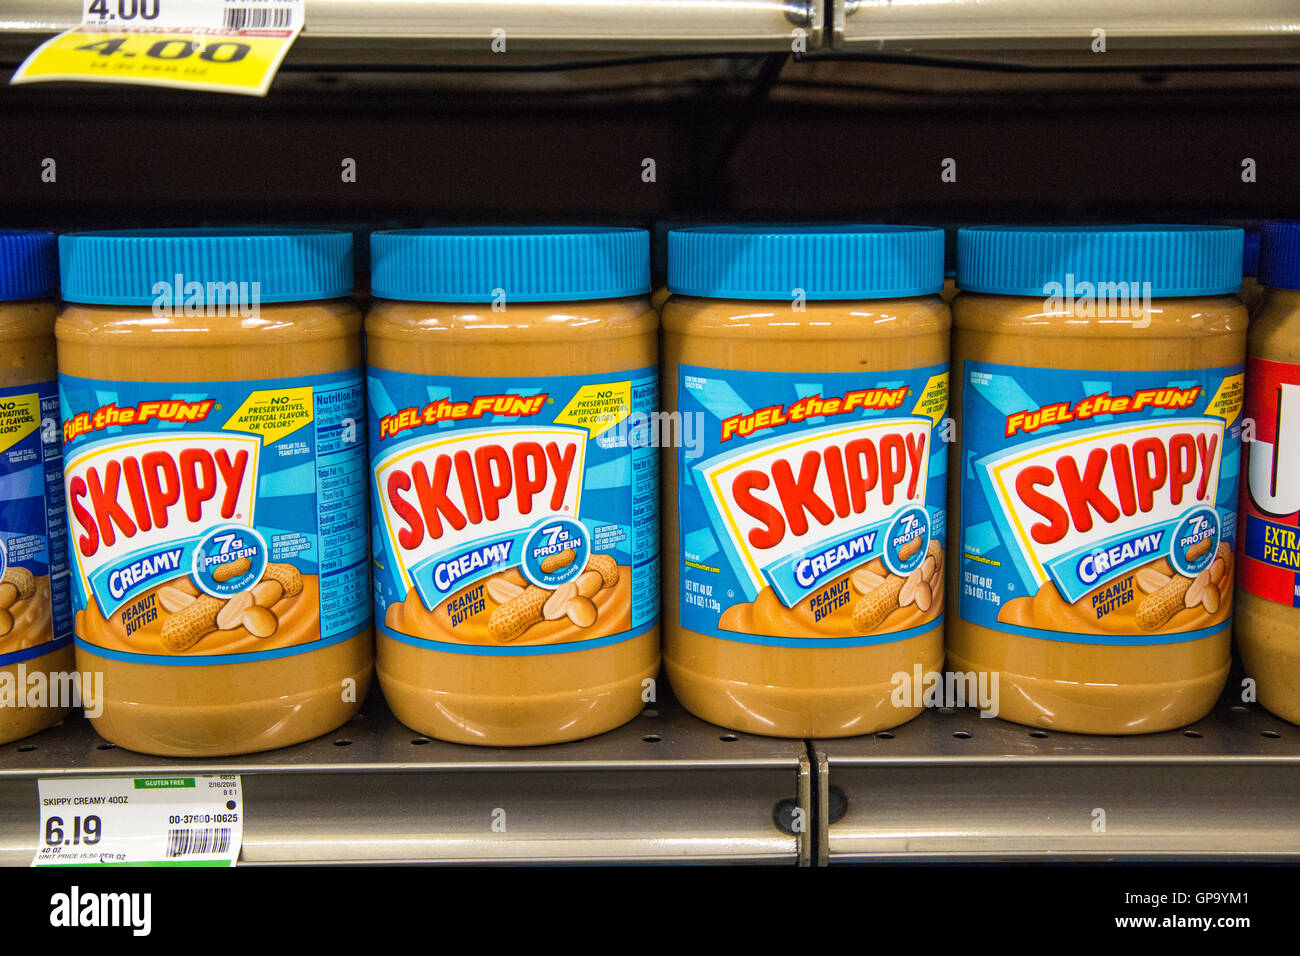 Jars of Skippy peanut butter on the shelf of a grocery store Stock Photo